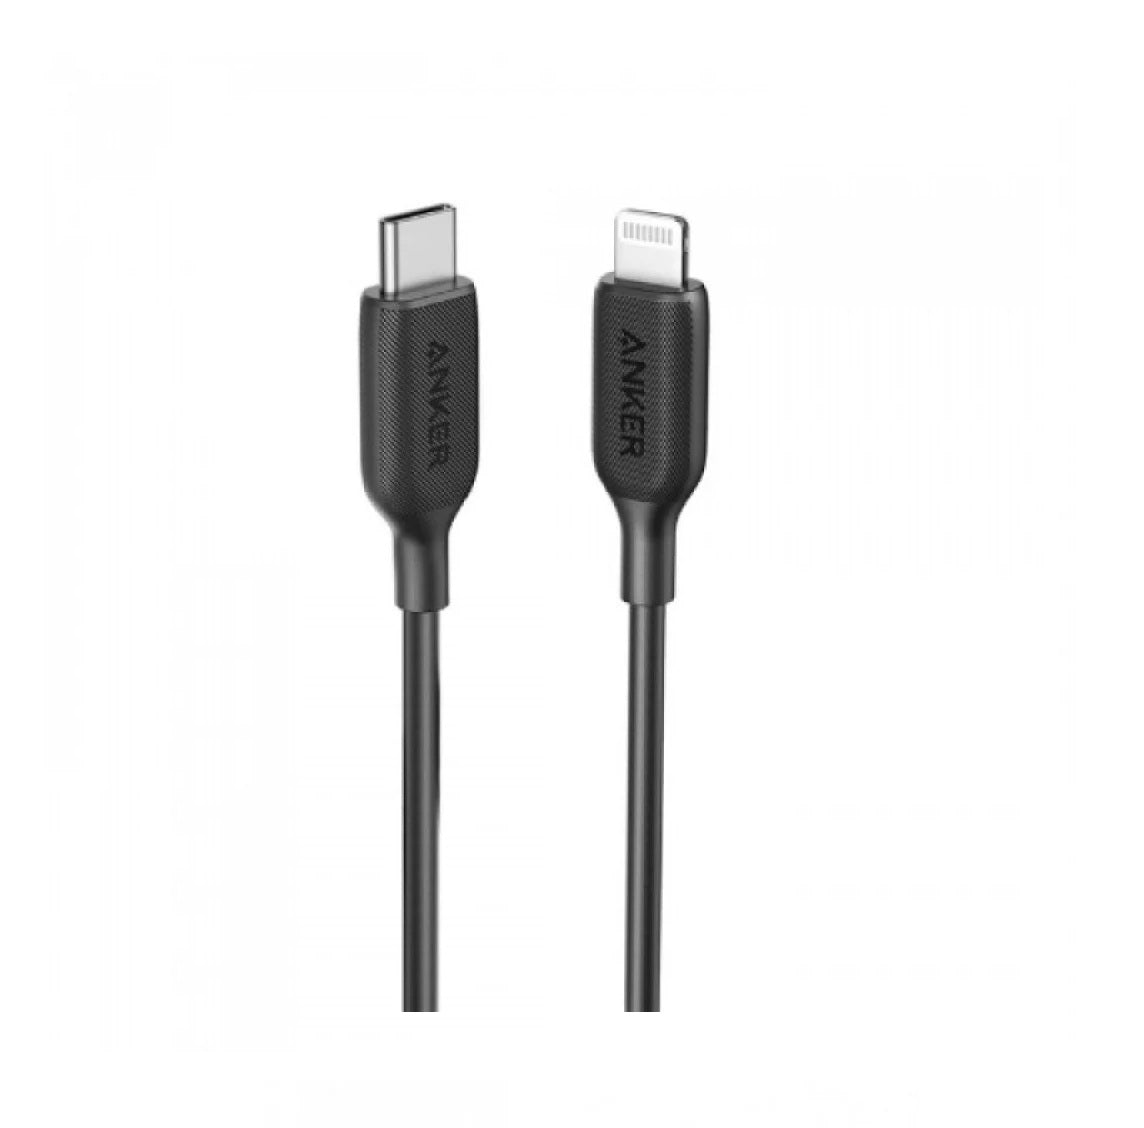 ANKER POWERLINE III USB-C TO LIGHTING (0.9M/3FT) CABLE - BLACK